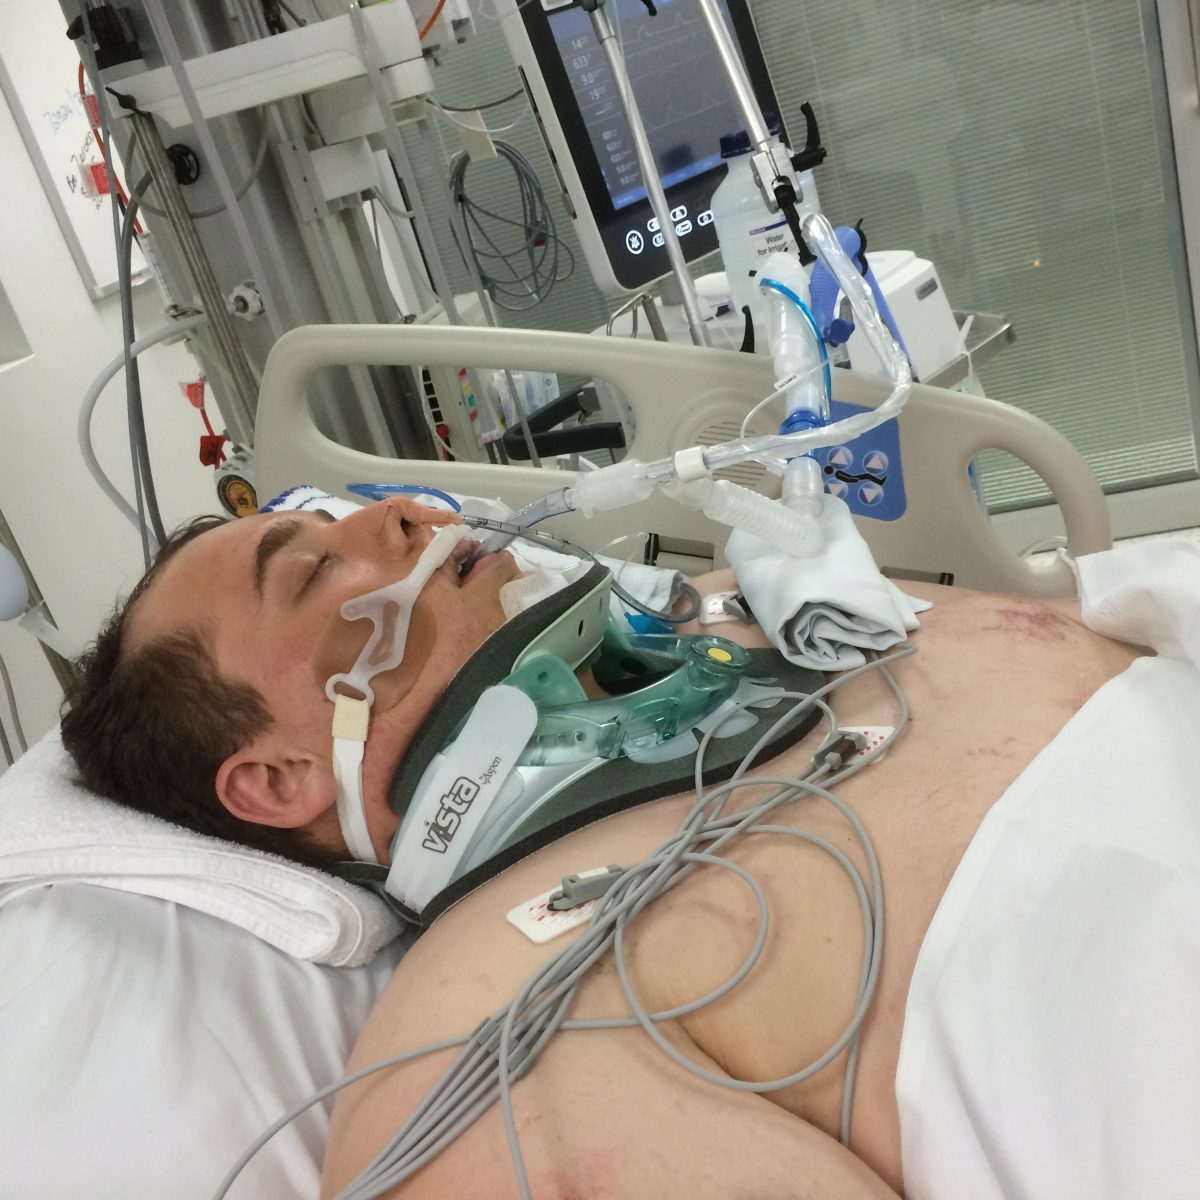 Alex Lees spent 13 days in a coma